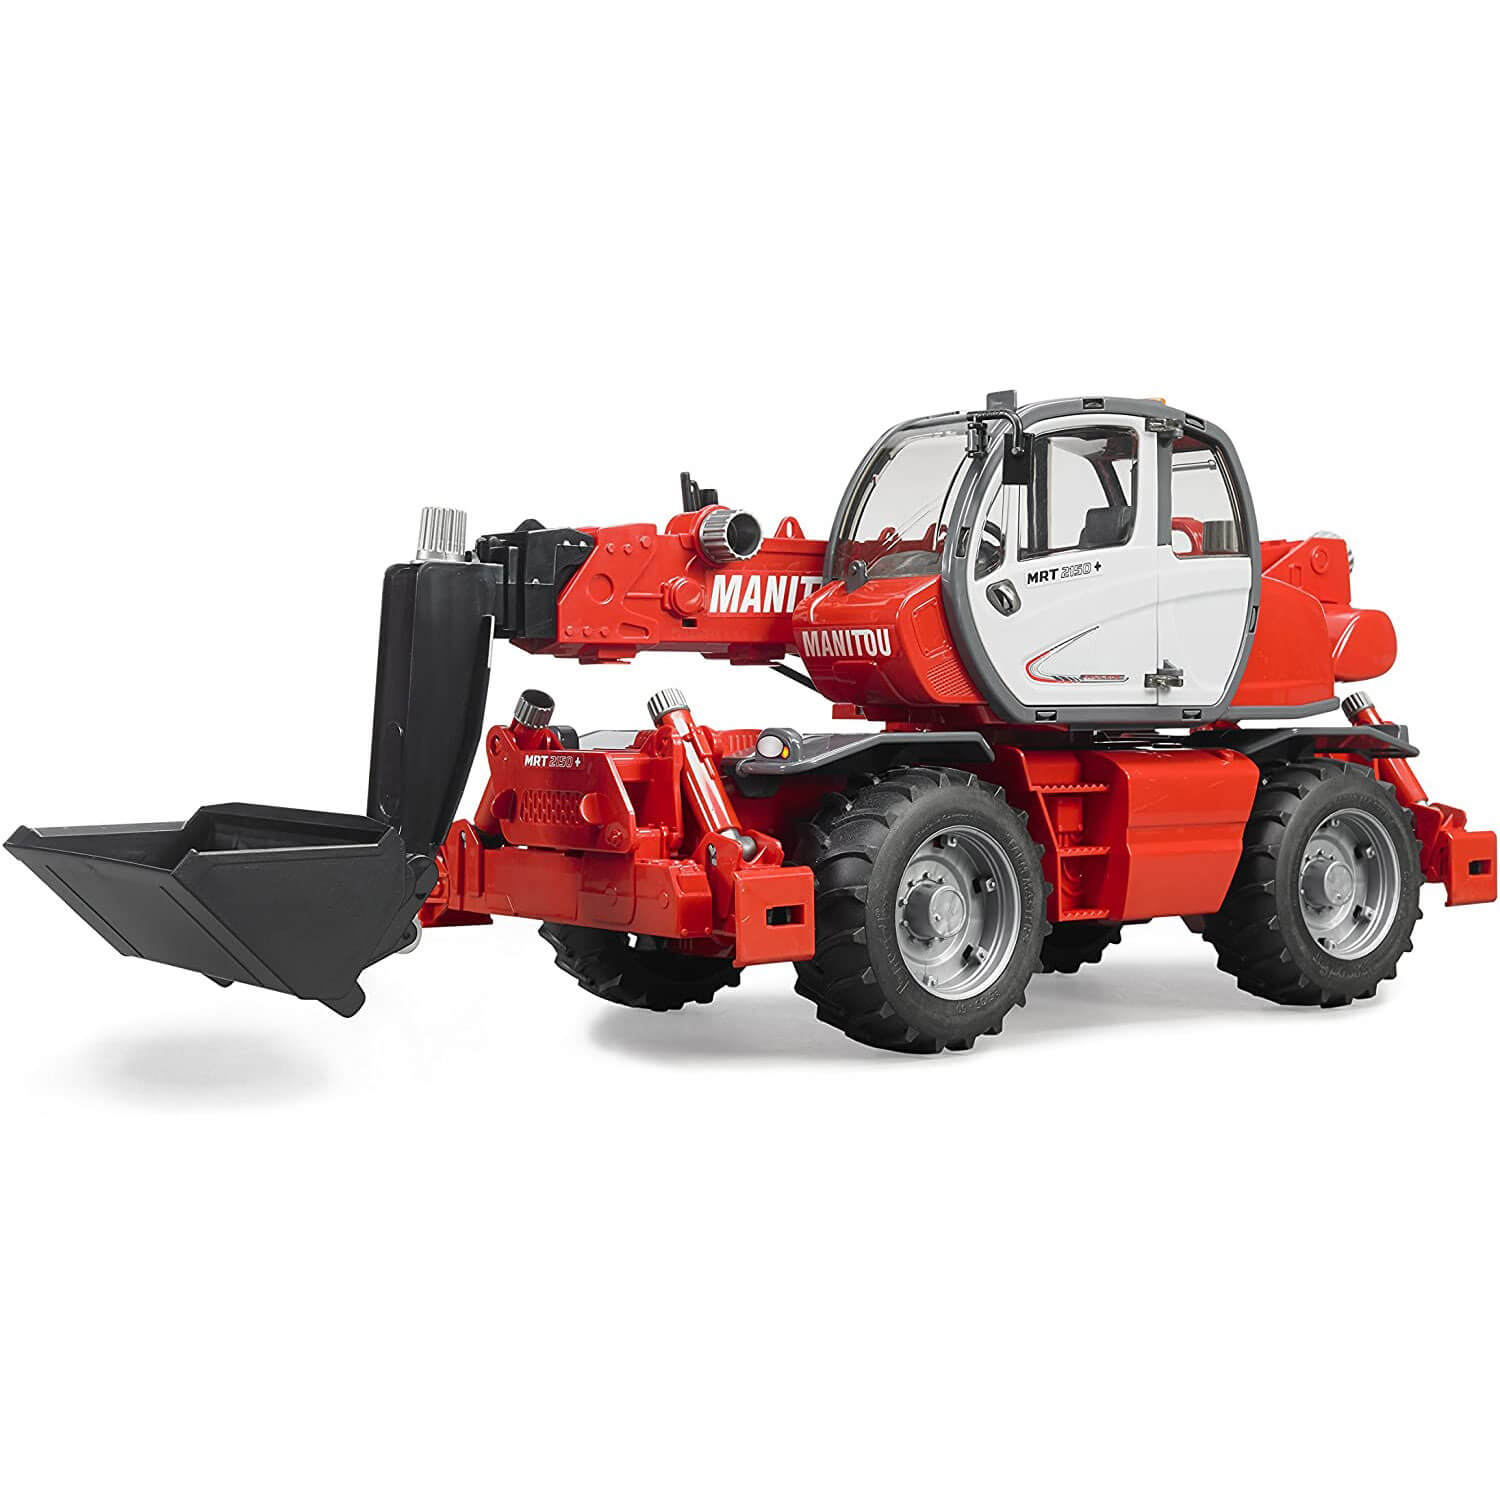 Bruder Pro Series Manitou Telescopic Loader MRT 2150 1:16 Scale Vehicle